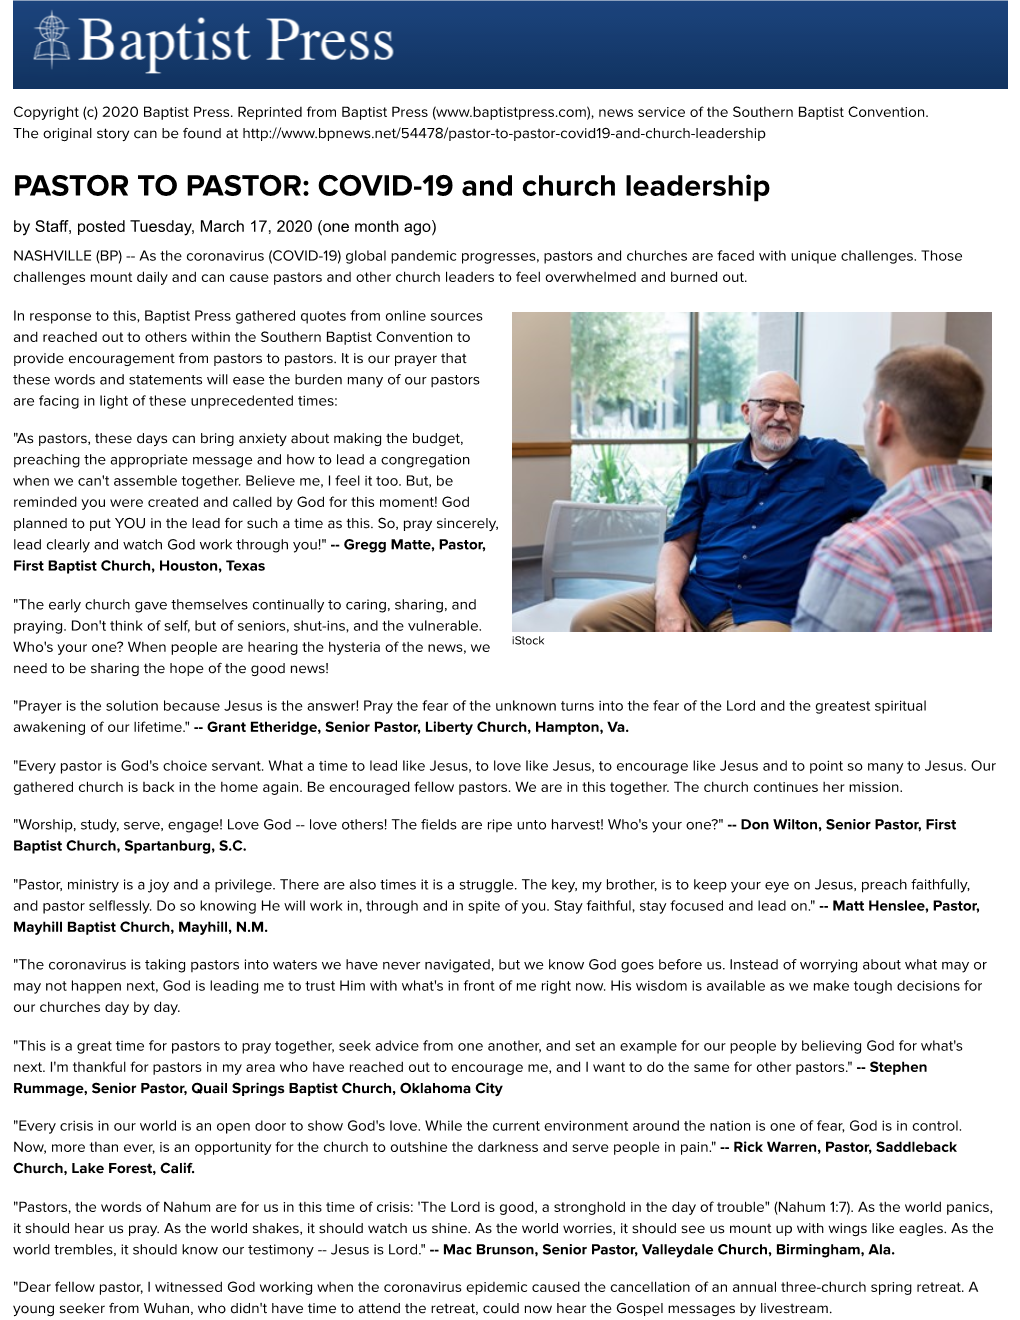 PASTOR to PASTOR: COVID-19 and Church Leadership